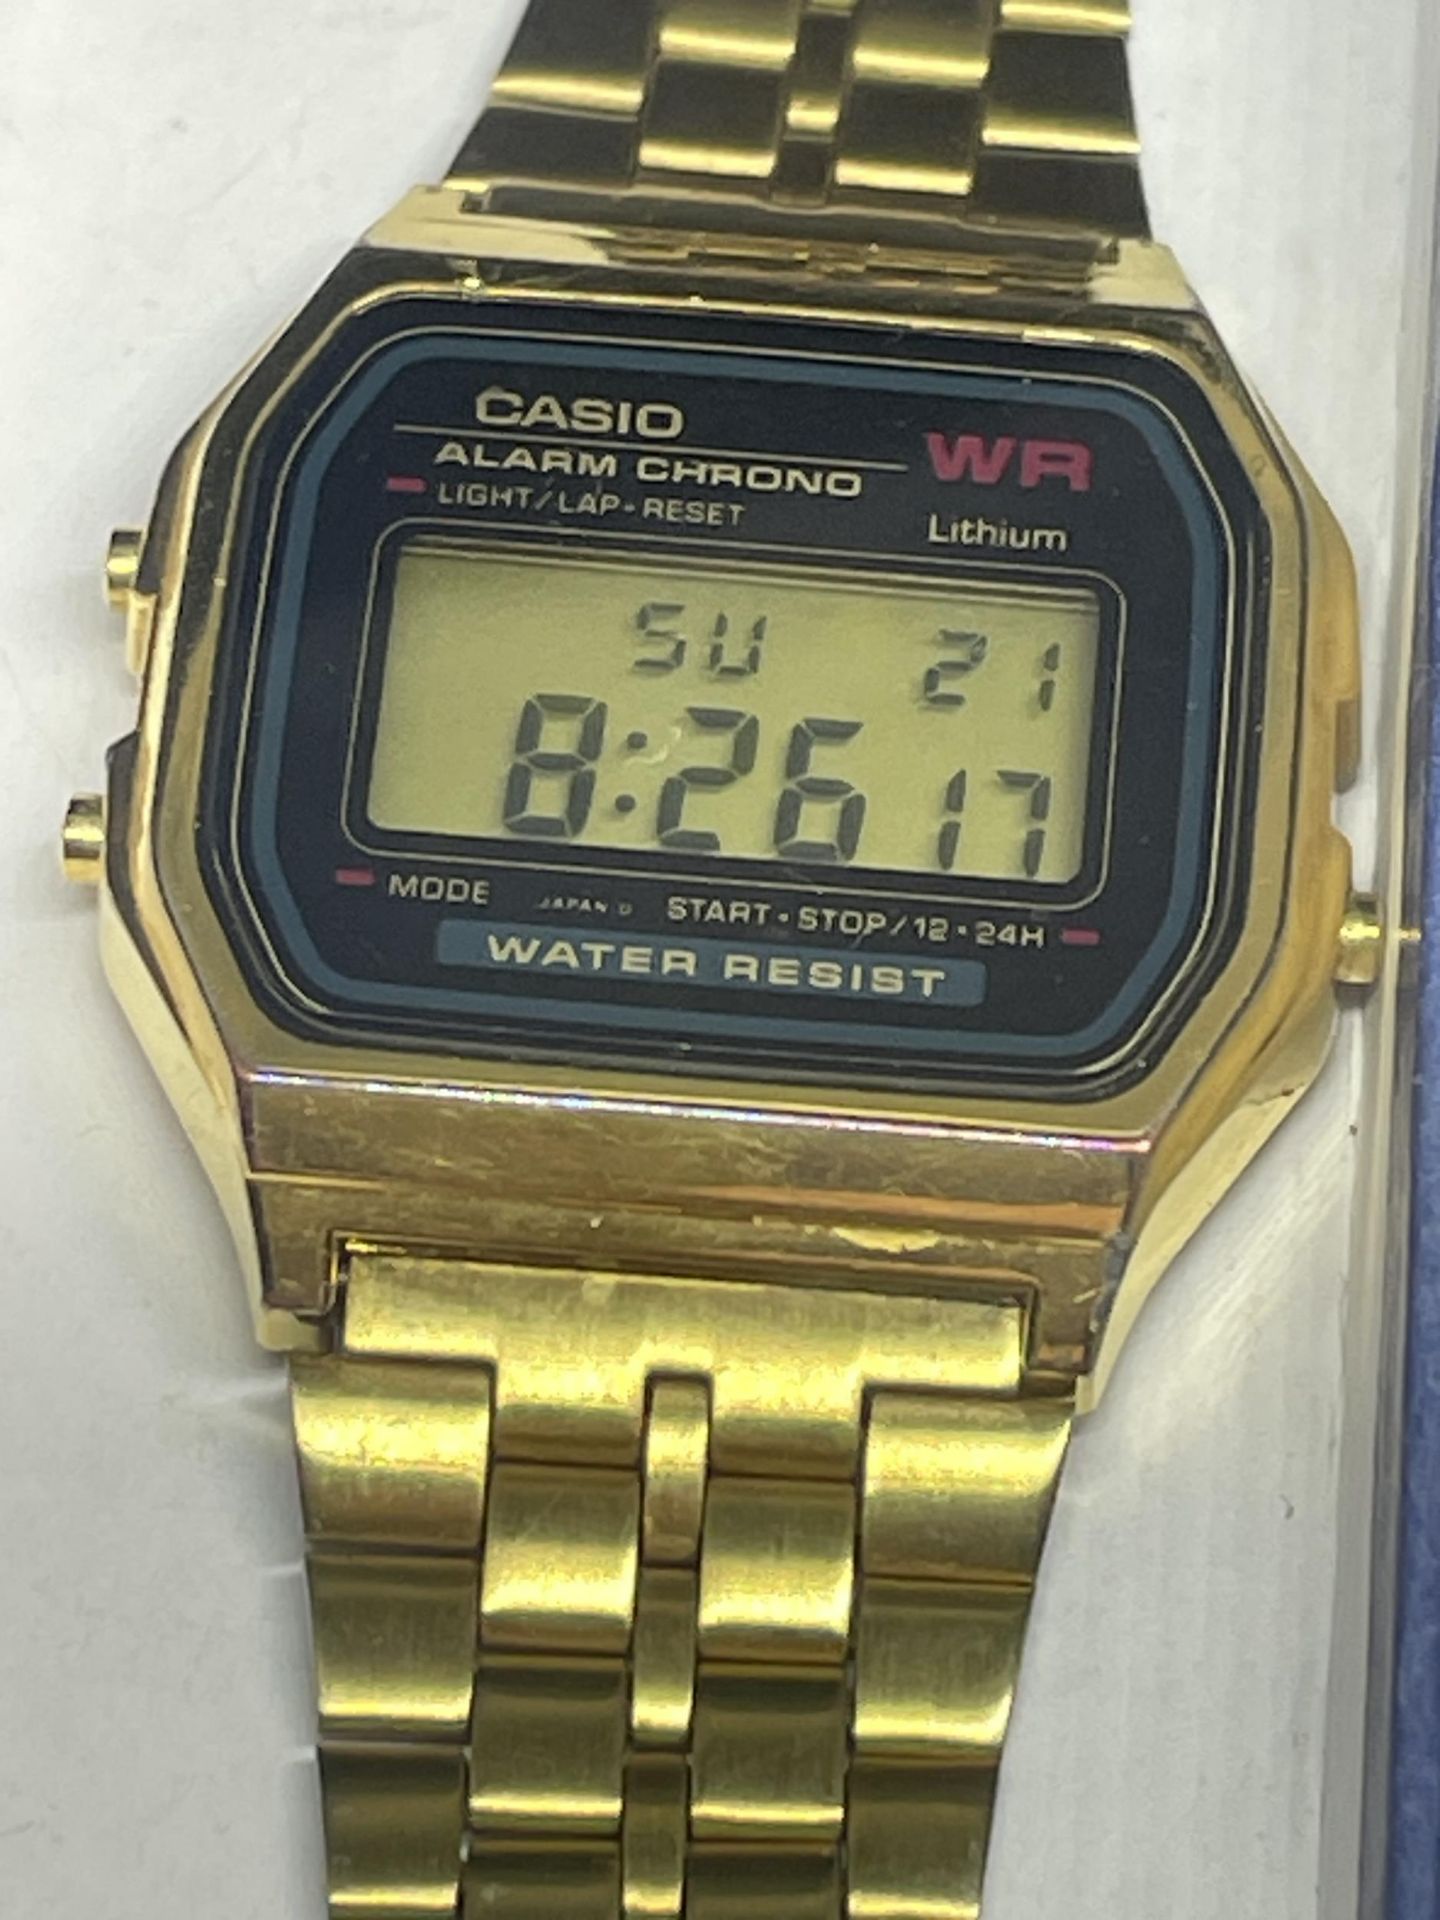 A VINTAGE CASIO DIGITAL YELLOW METAL WRIST WATCH SEEN WORKING BUT NO WARRANTY GIVEN - Image 2 of 3